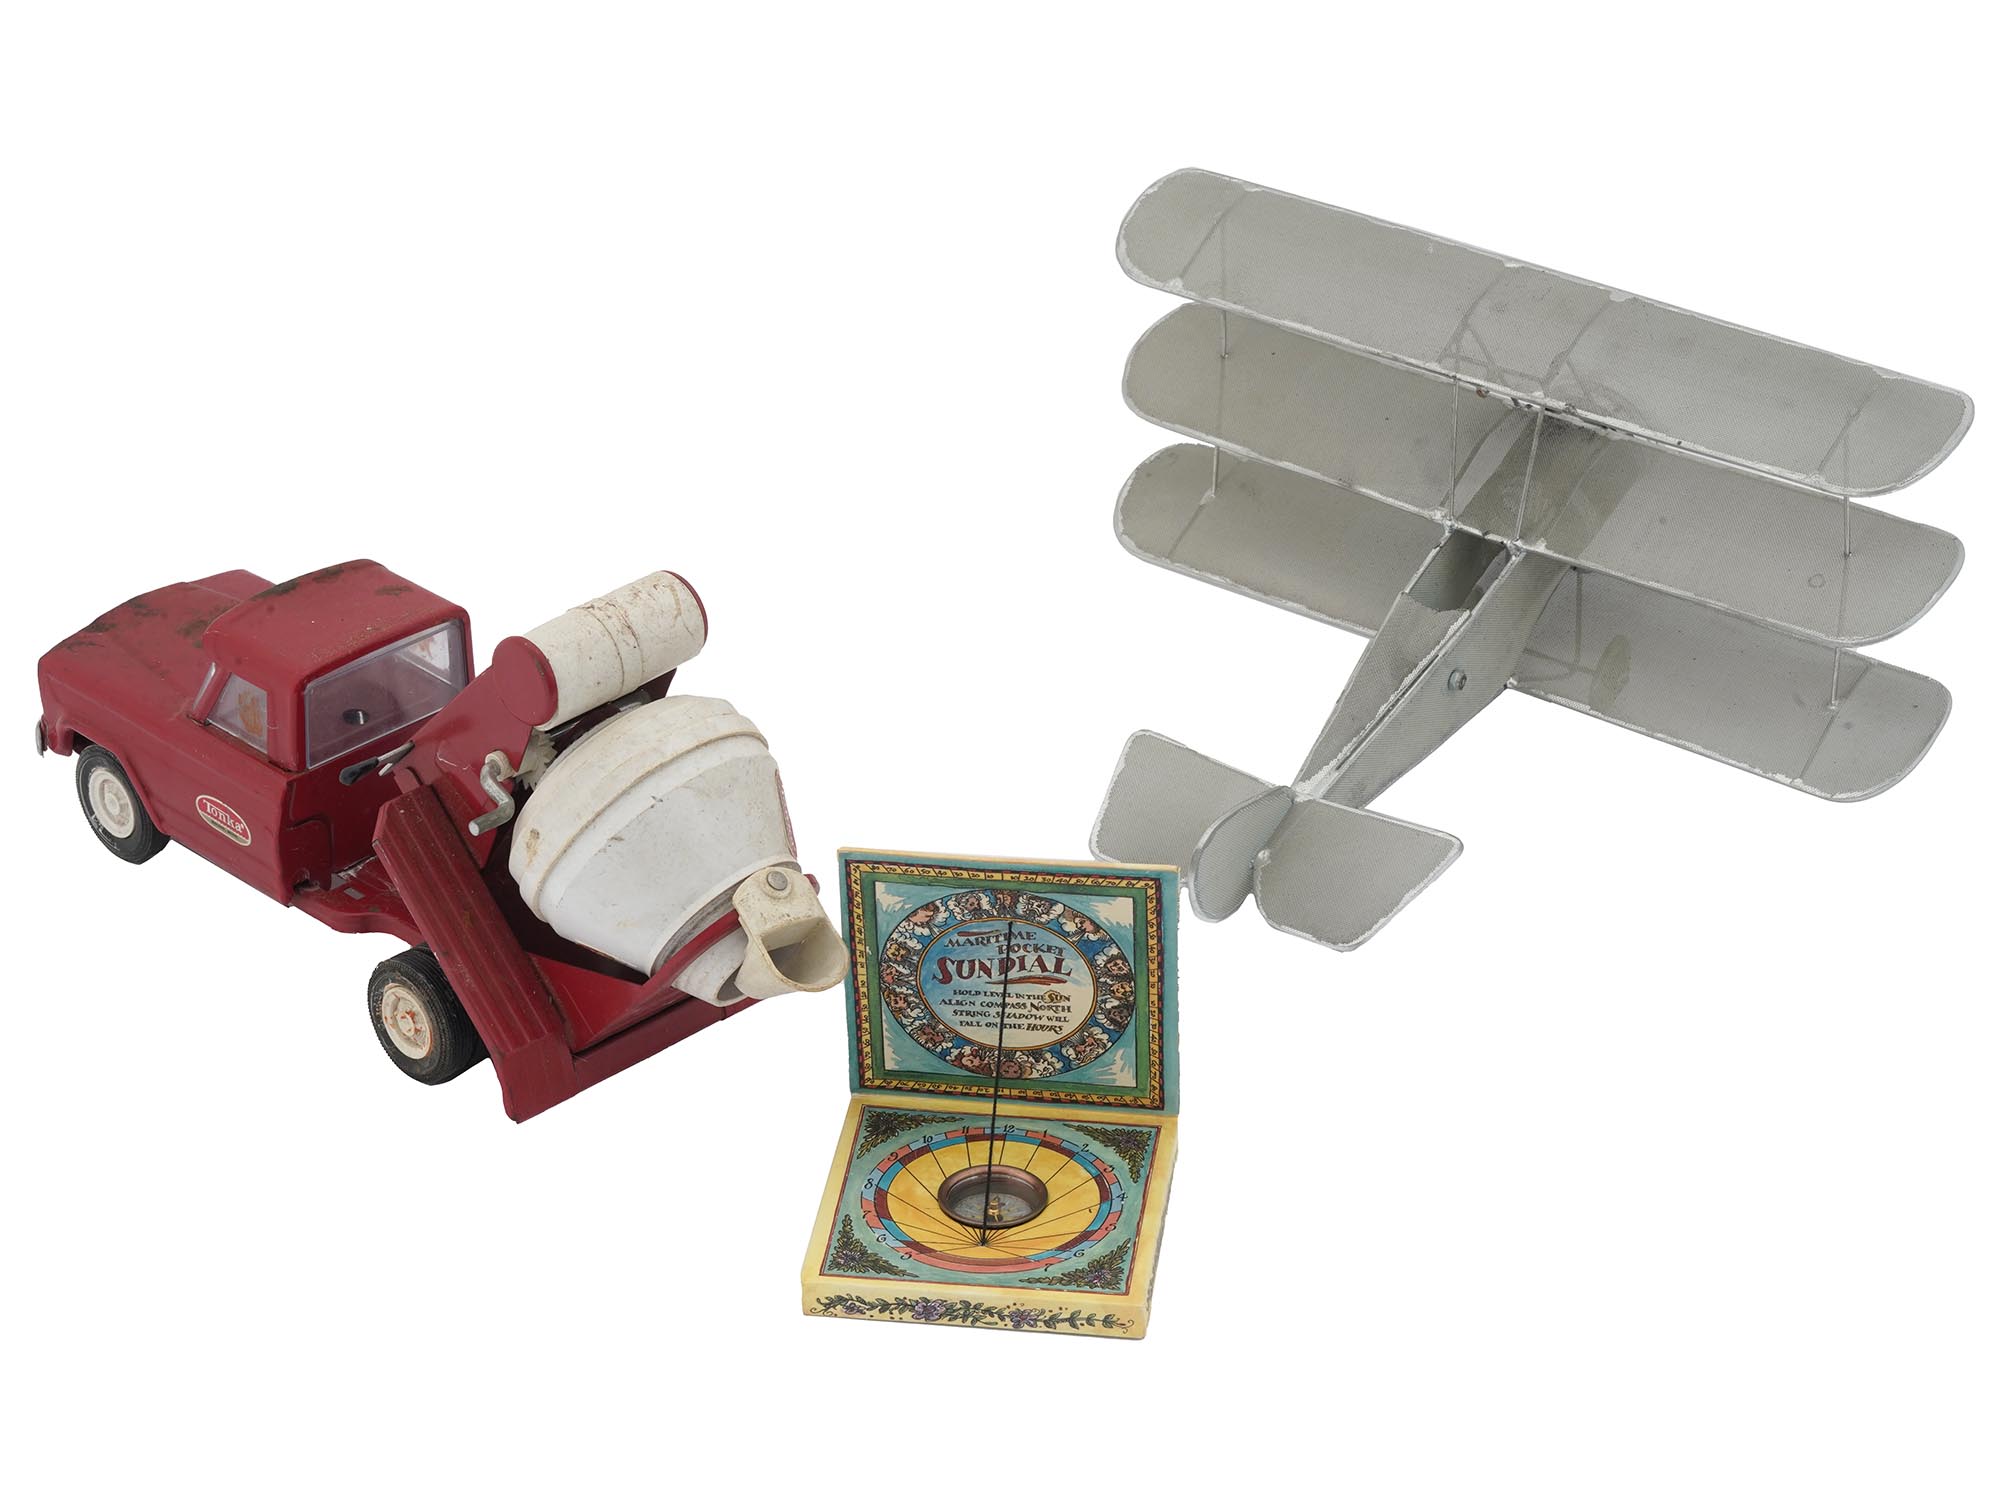 GROUP OF POCKET COMPASS CAR AND AIR PLANE MODELS PIC-2